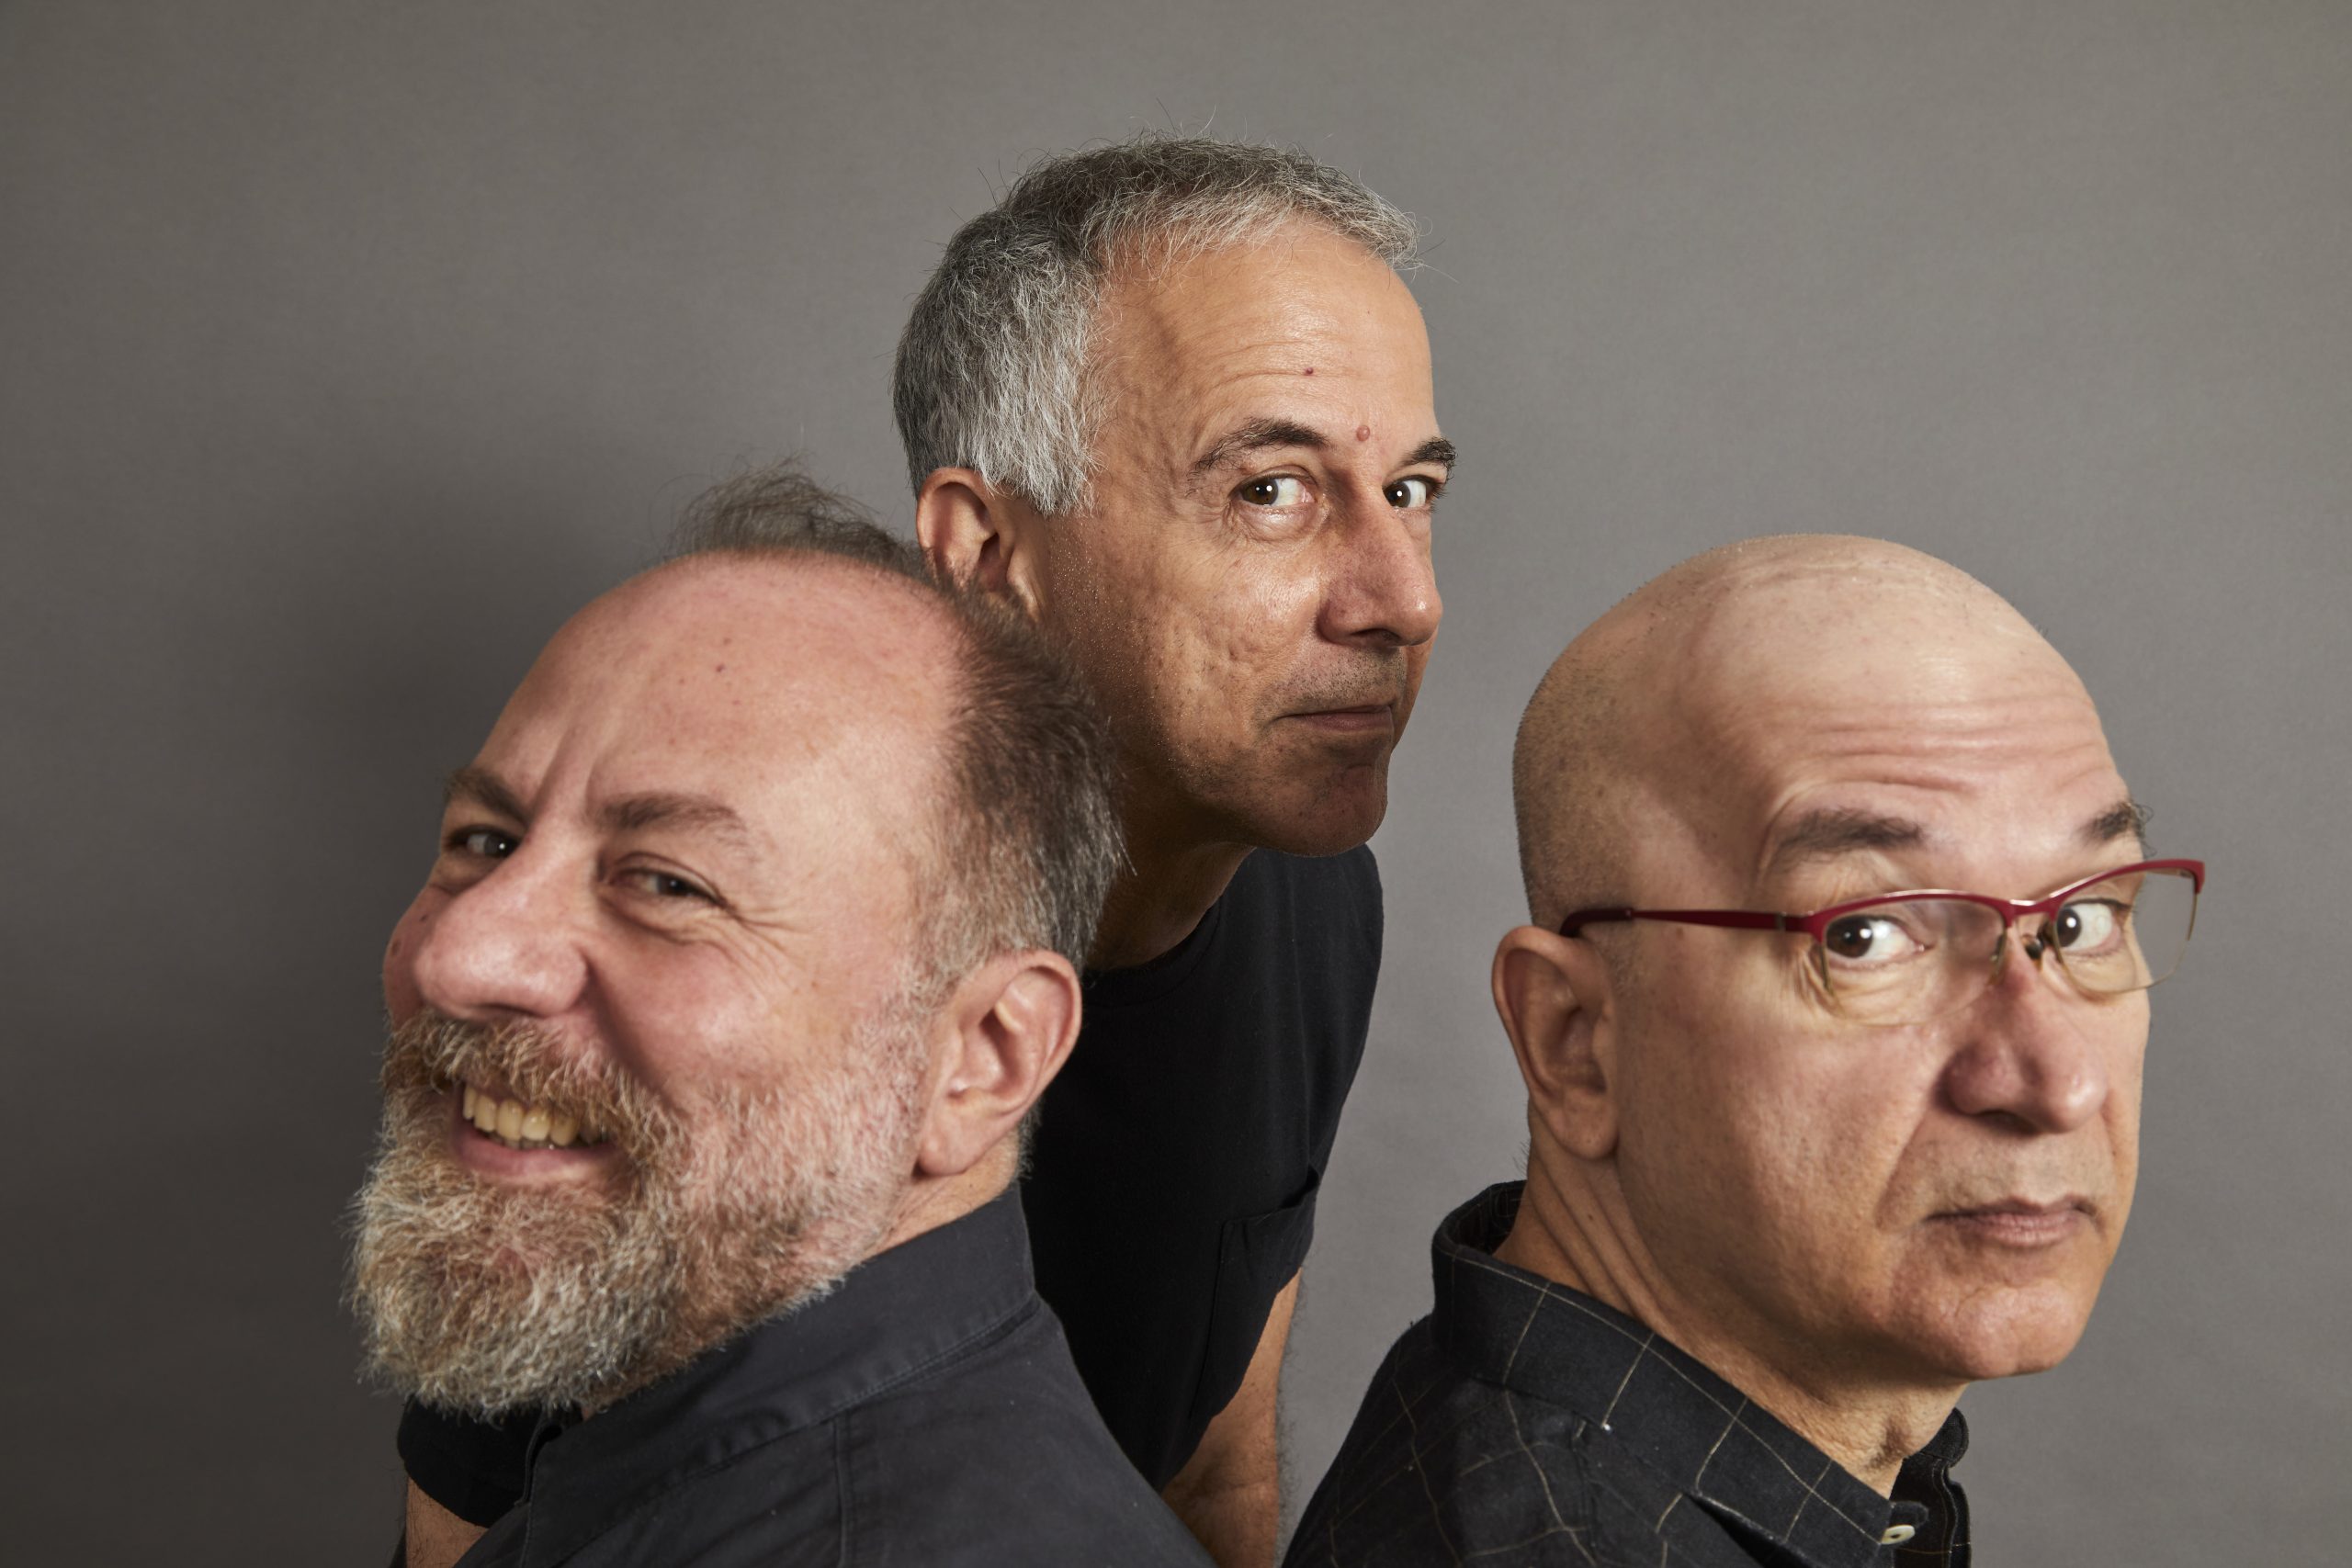 Paralamas do Sucesso presents “Clássicos” tour in Manaus on March 22